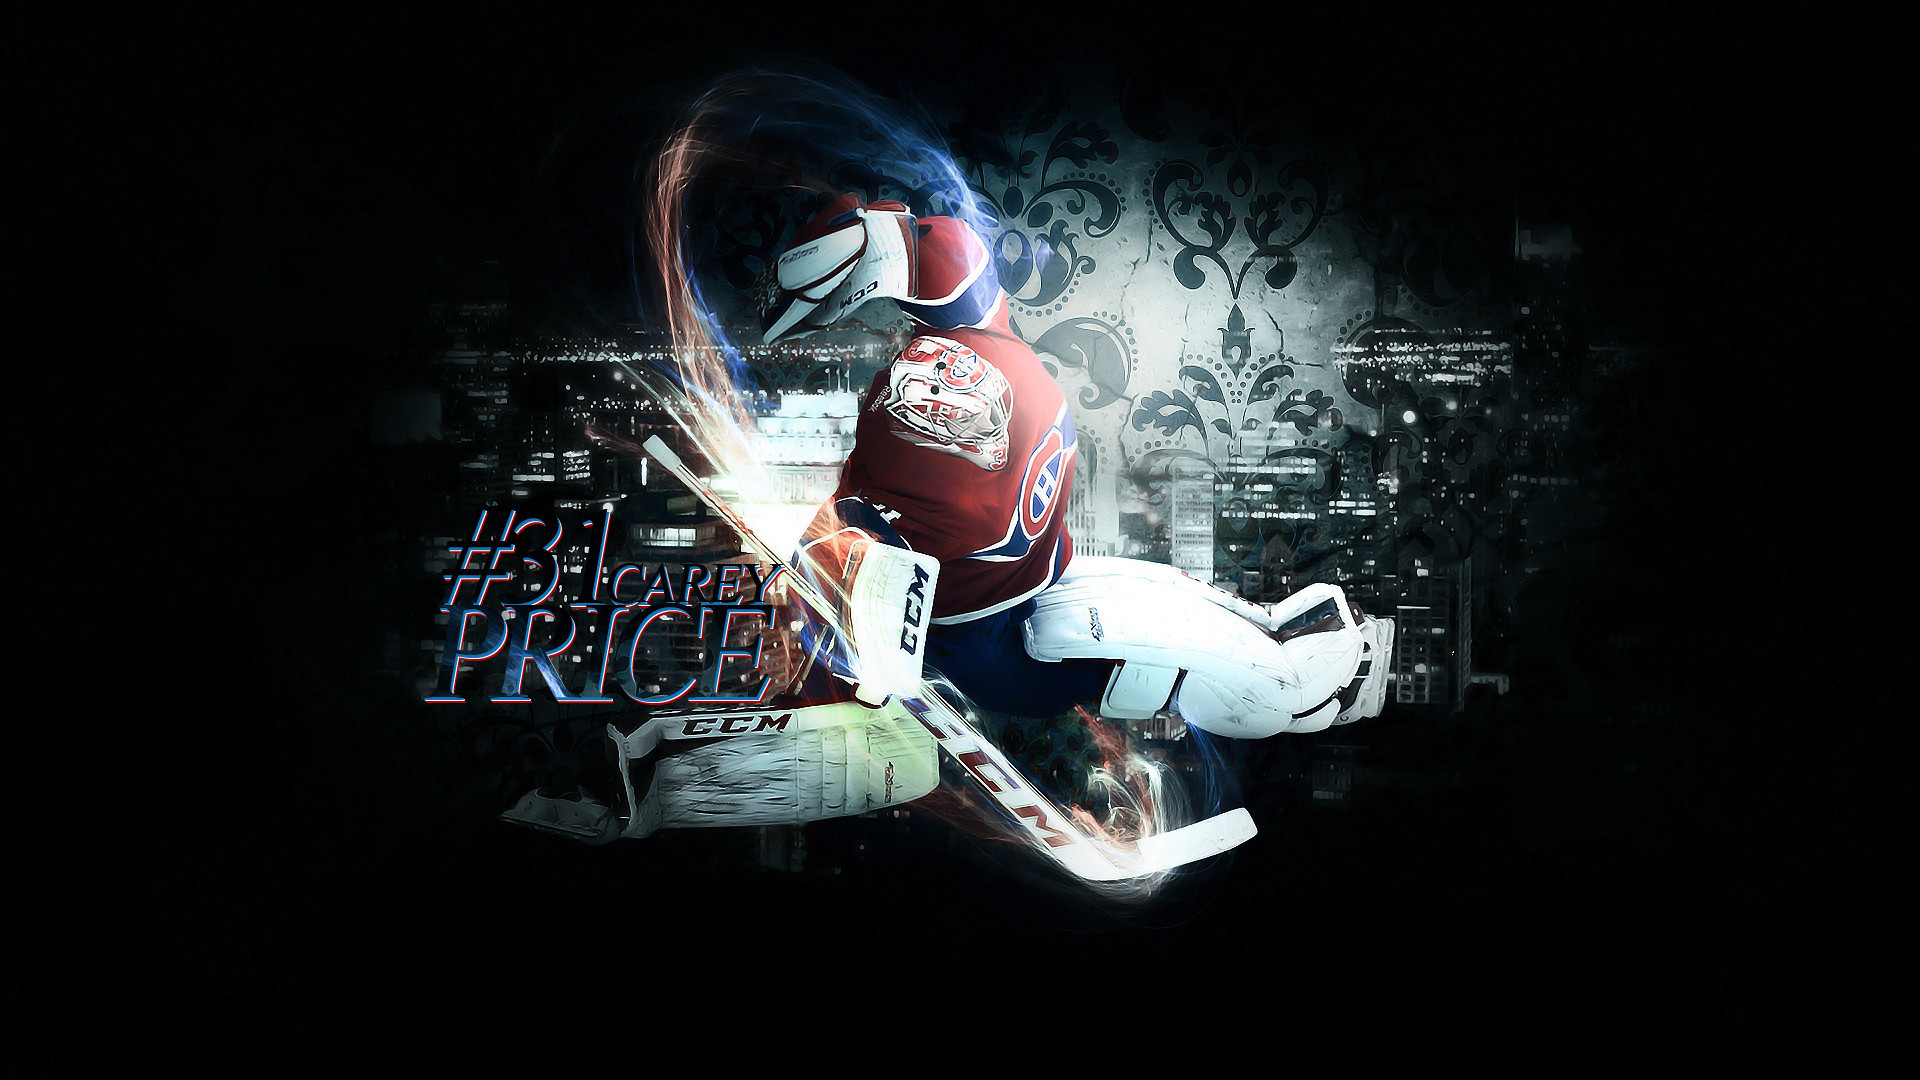 1920x1080 Carey Price Wallpapers | Montreal Habs | Montreal Hockey | #11